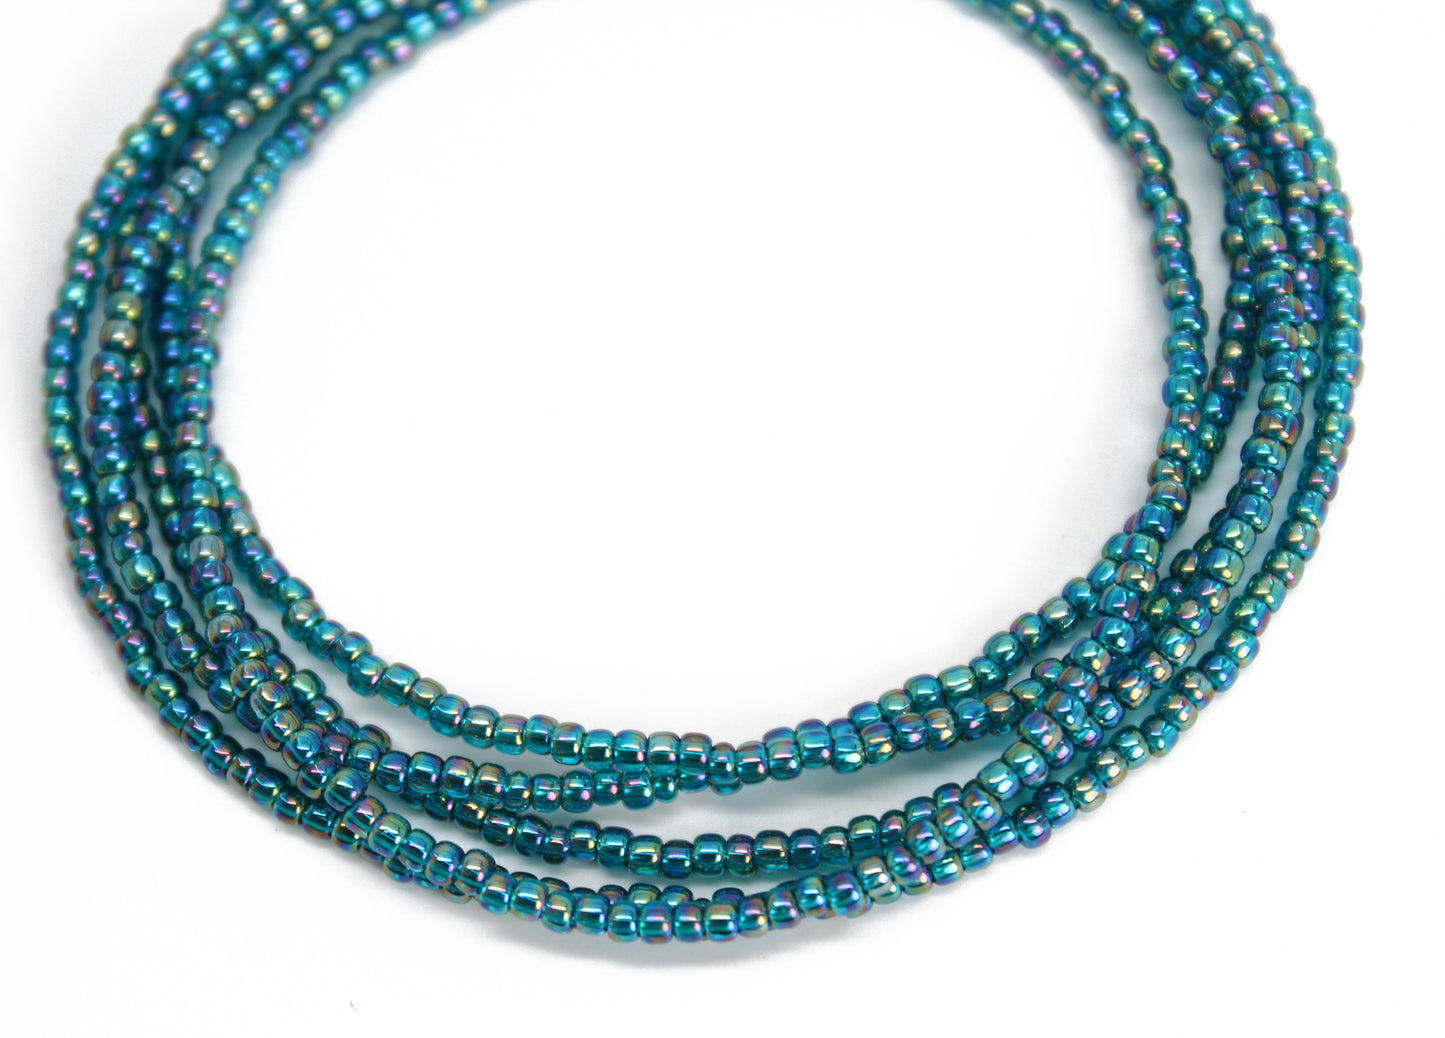 Transparent Rainbow Teal Seed Bead Necklace, Thin 1.5mm Single Strand